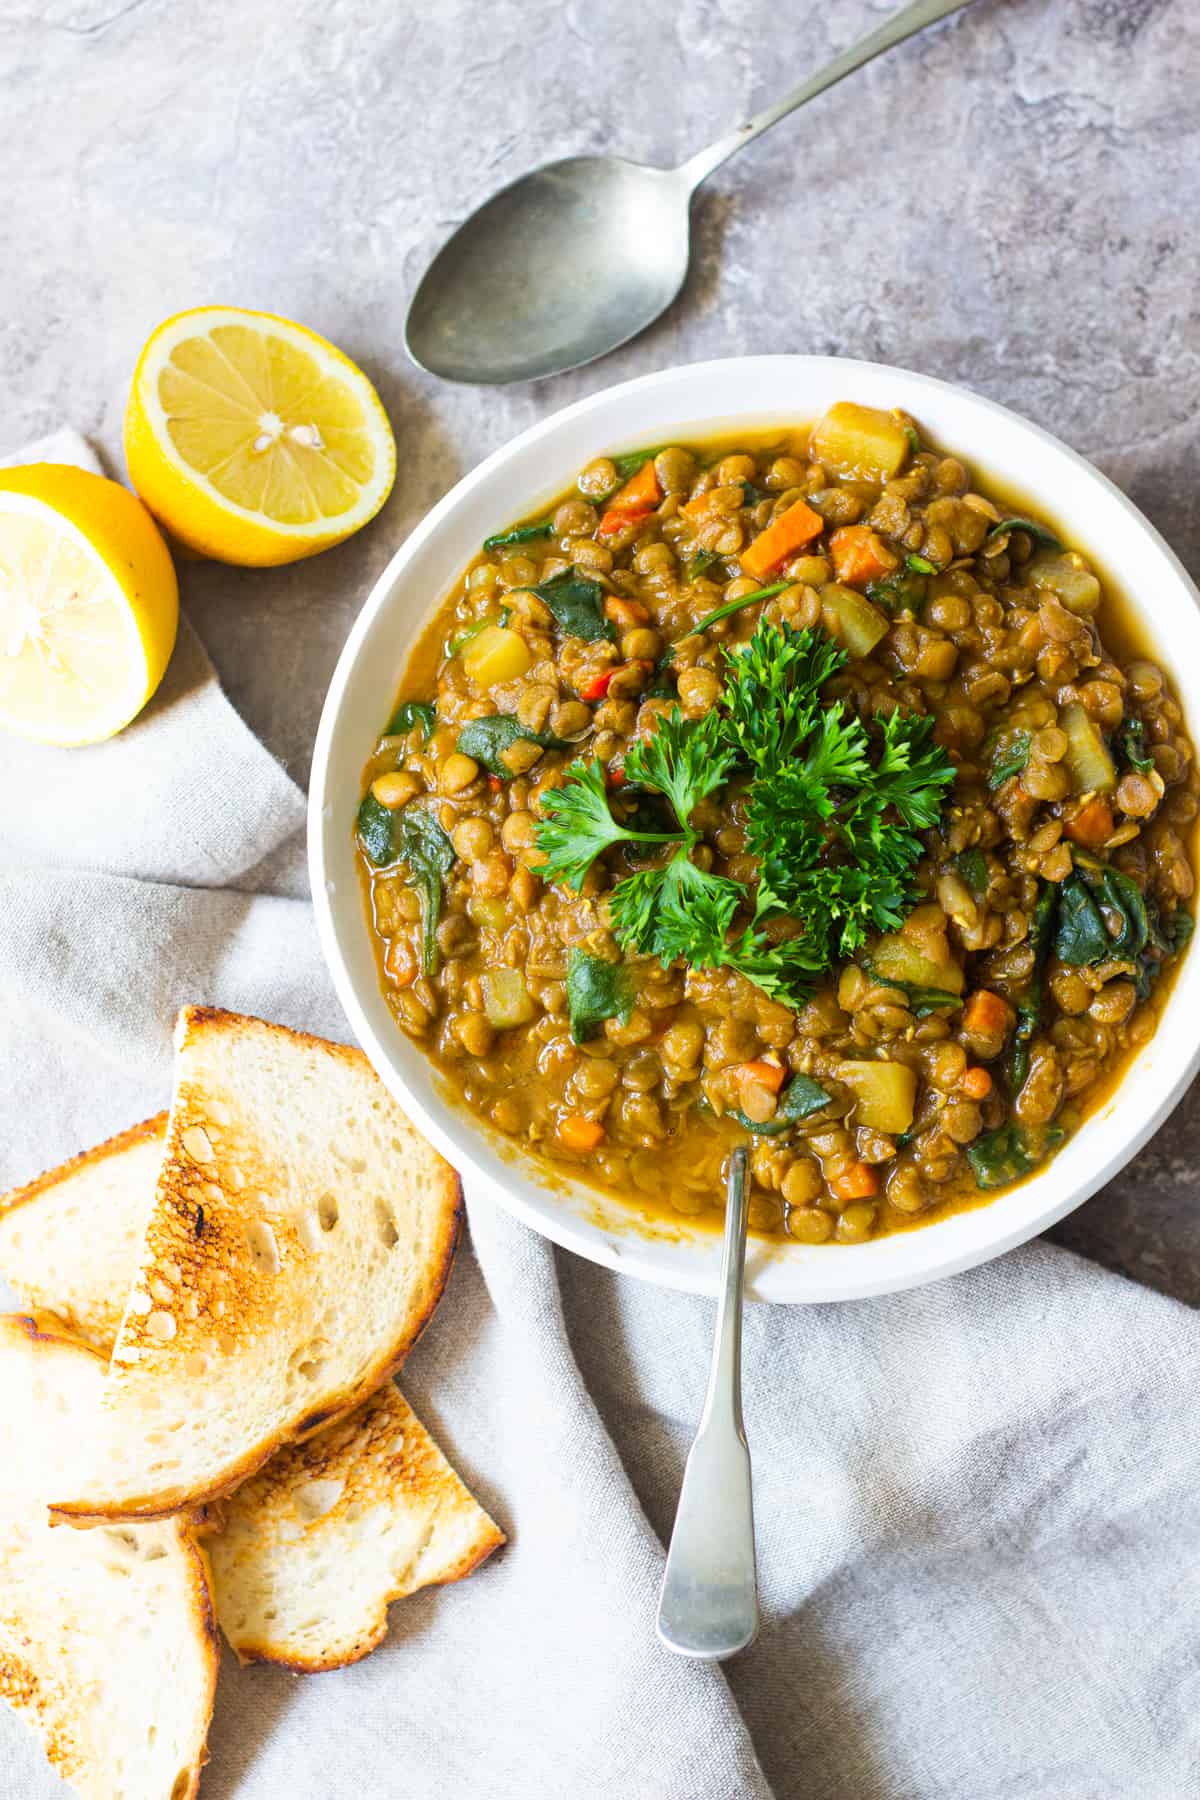 Here's a green lentil soup with a Mediterranean twist. Packed with vegetables and spices, this recipe proves that healthy soups don't have to be bland!